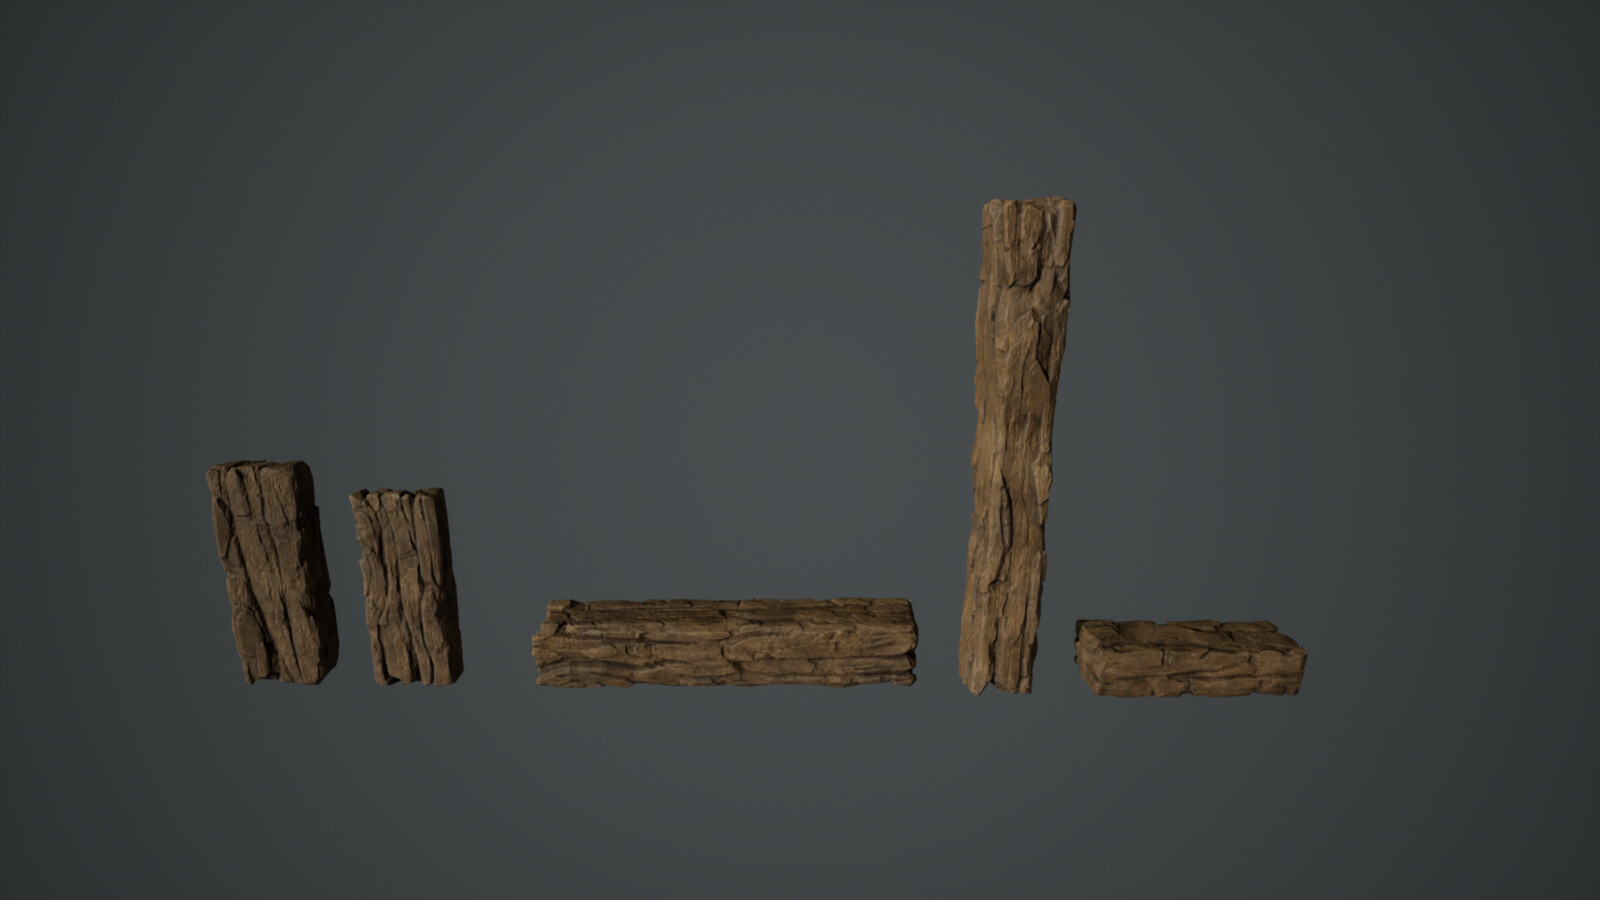 Wood meshes scattered throughout the scene